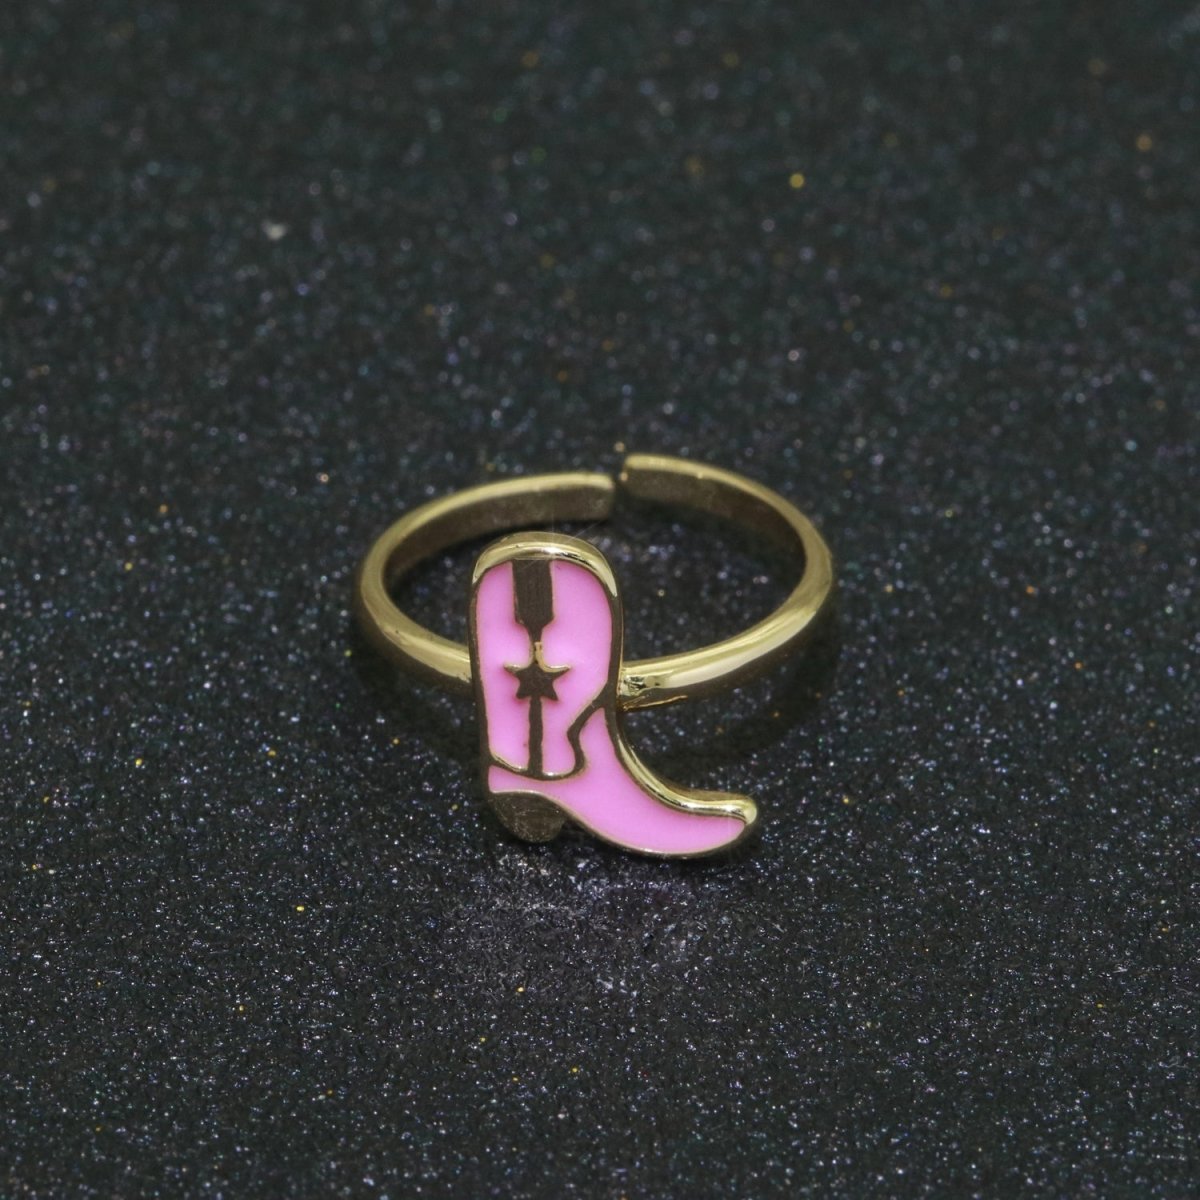 Dainty Cowboy Boots Stacking Ring, Gold Minimalist Ring Open Adjustable Ring Pink Enamel Ring Gold Filled O-540 - DLUXCA